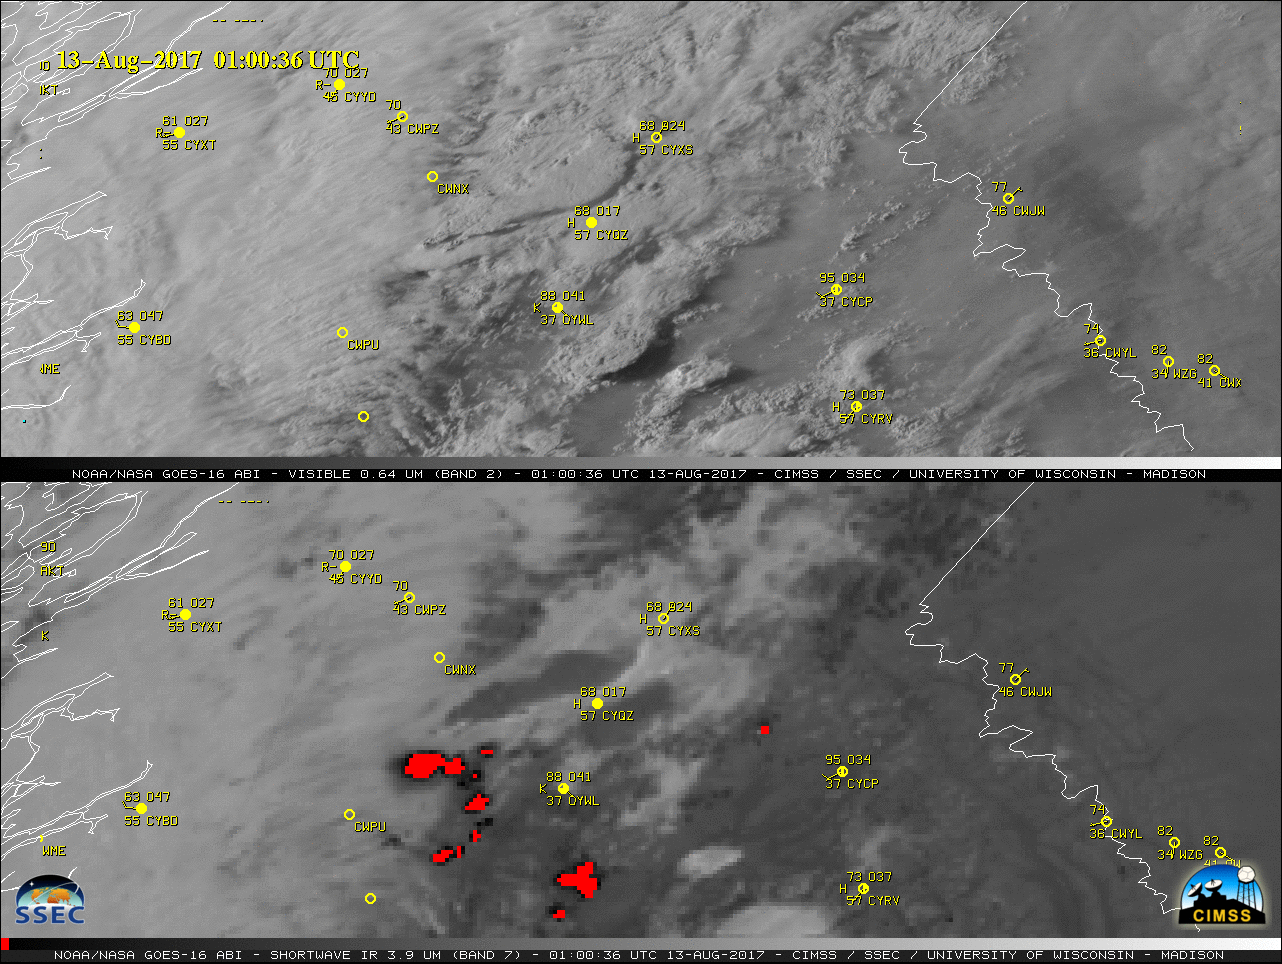 GOES-16 Visible (0.64 µm) and Shortwave Infrared (3.9 µm) images, with hourly surface reports plotted in yellow [click to play animation]